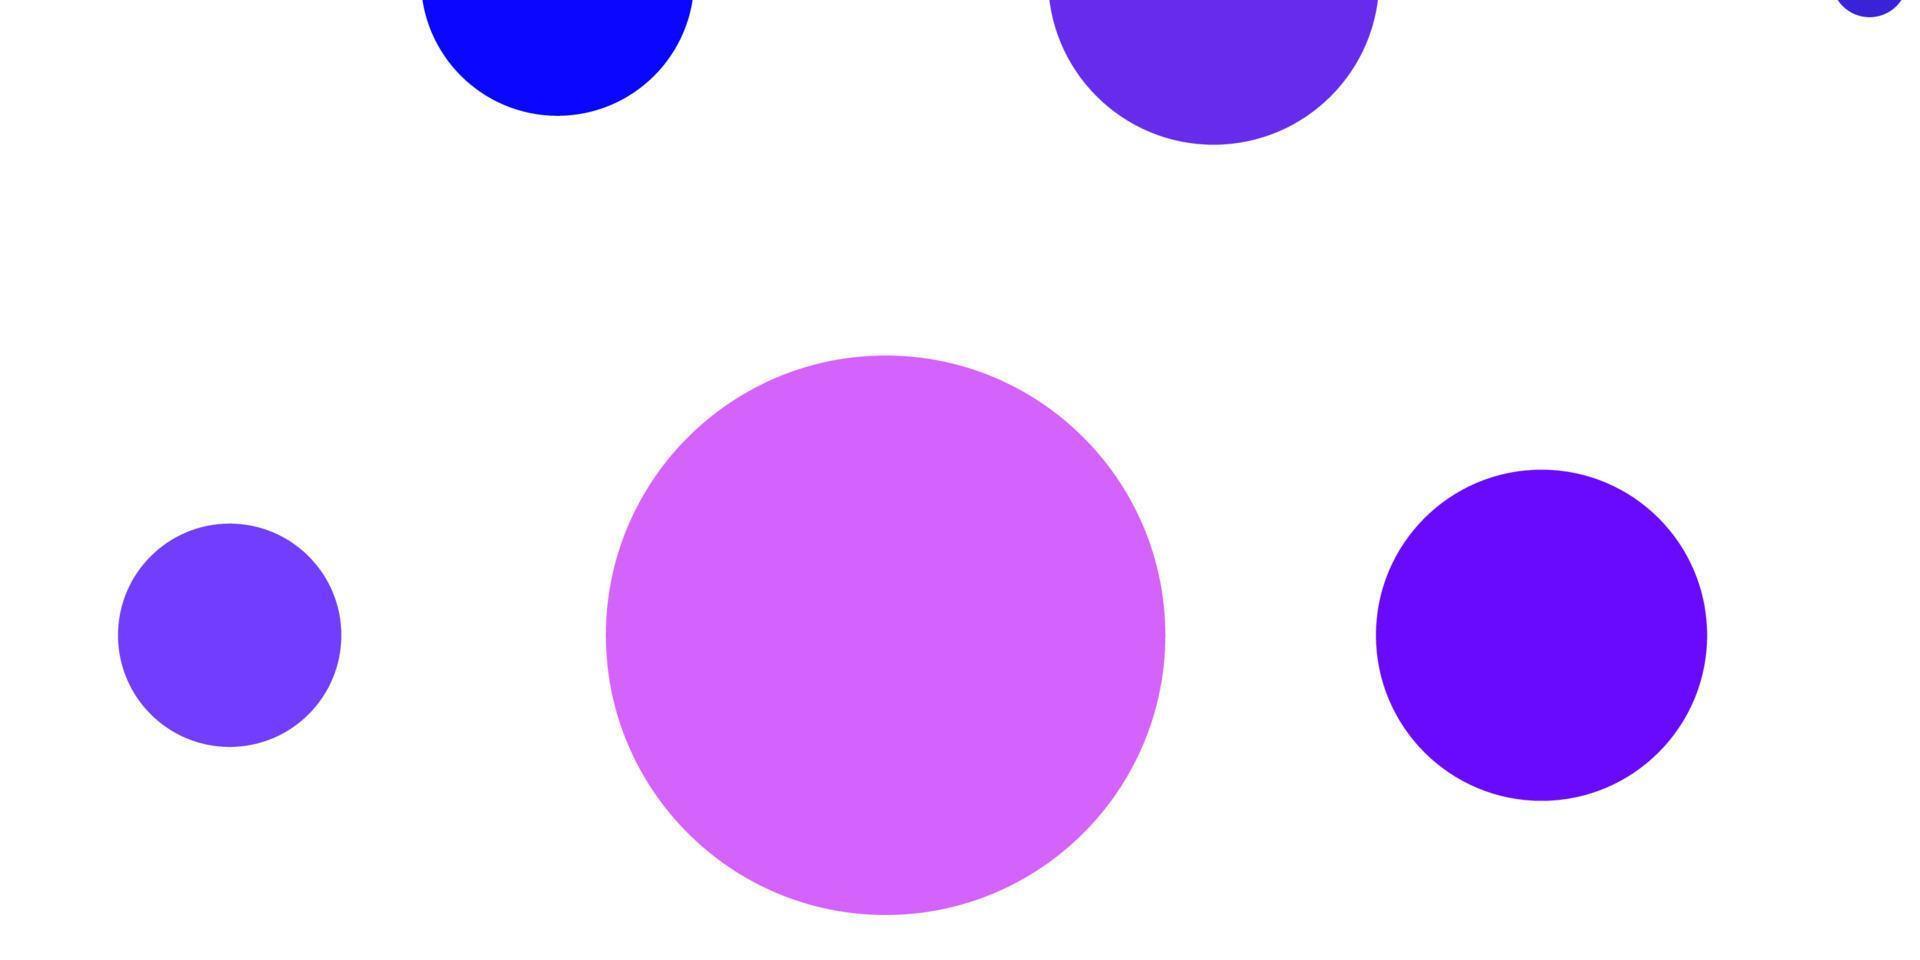 Light Pink, Blue vector background with circles.